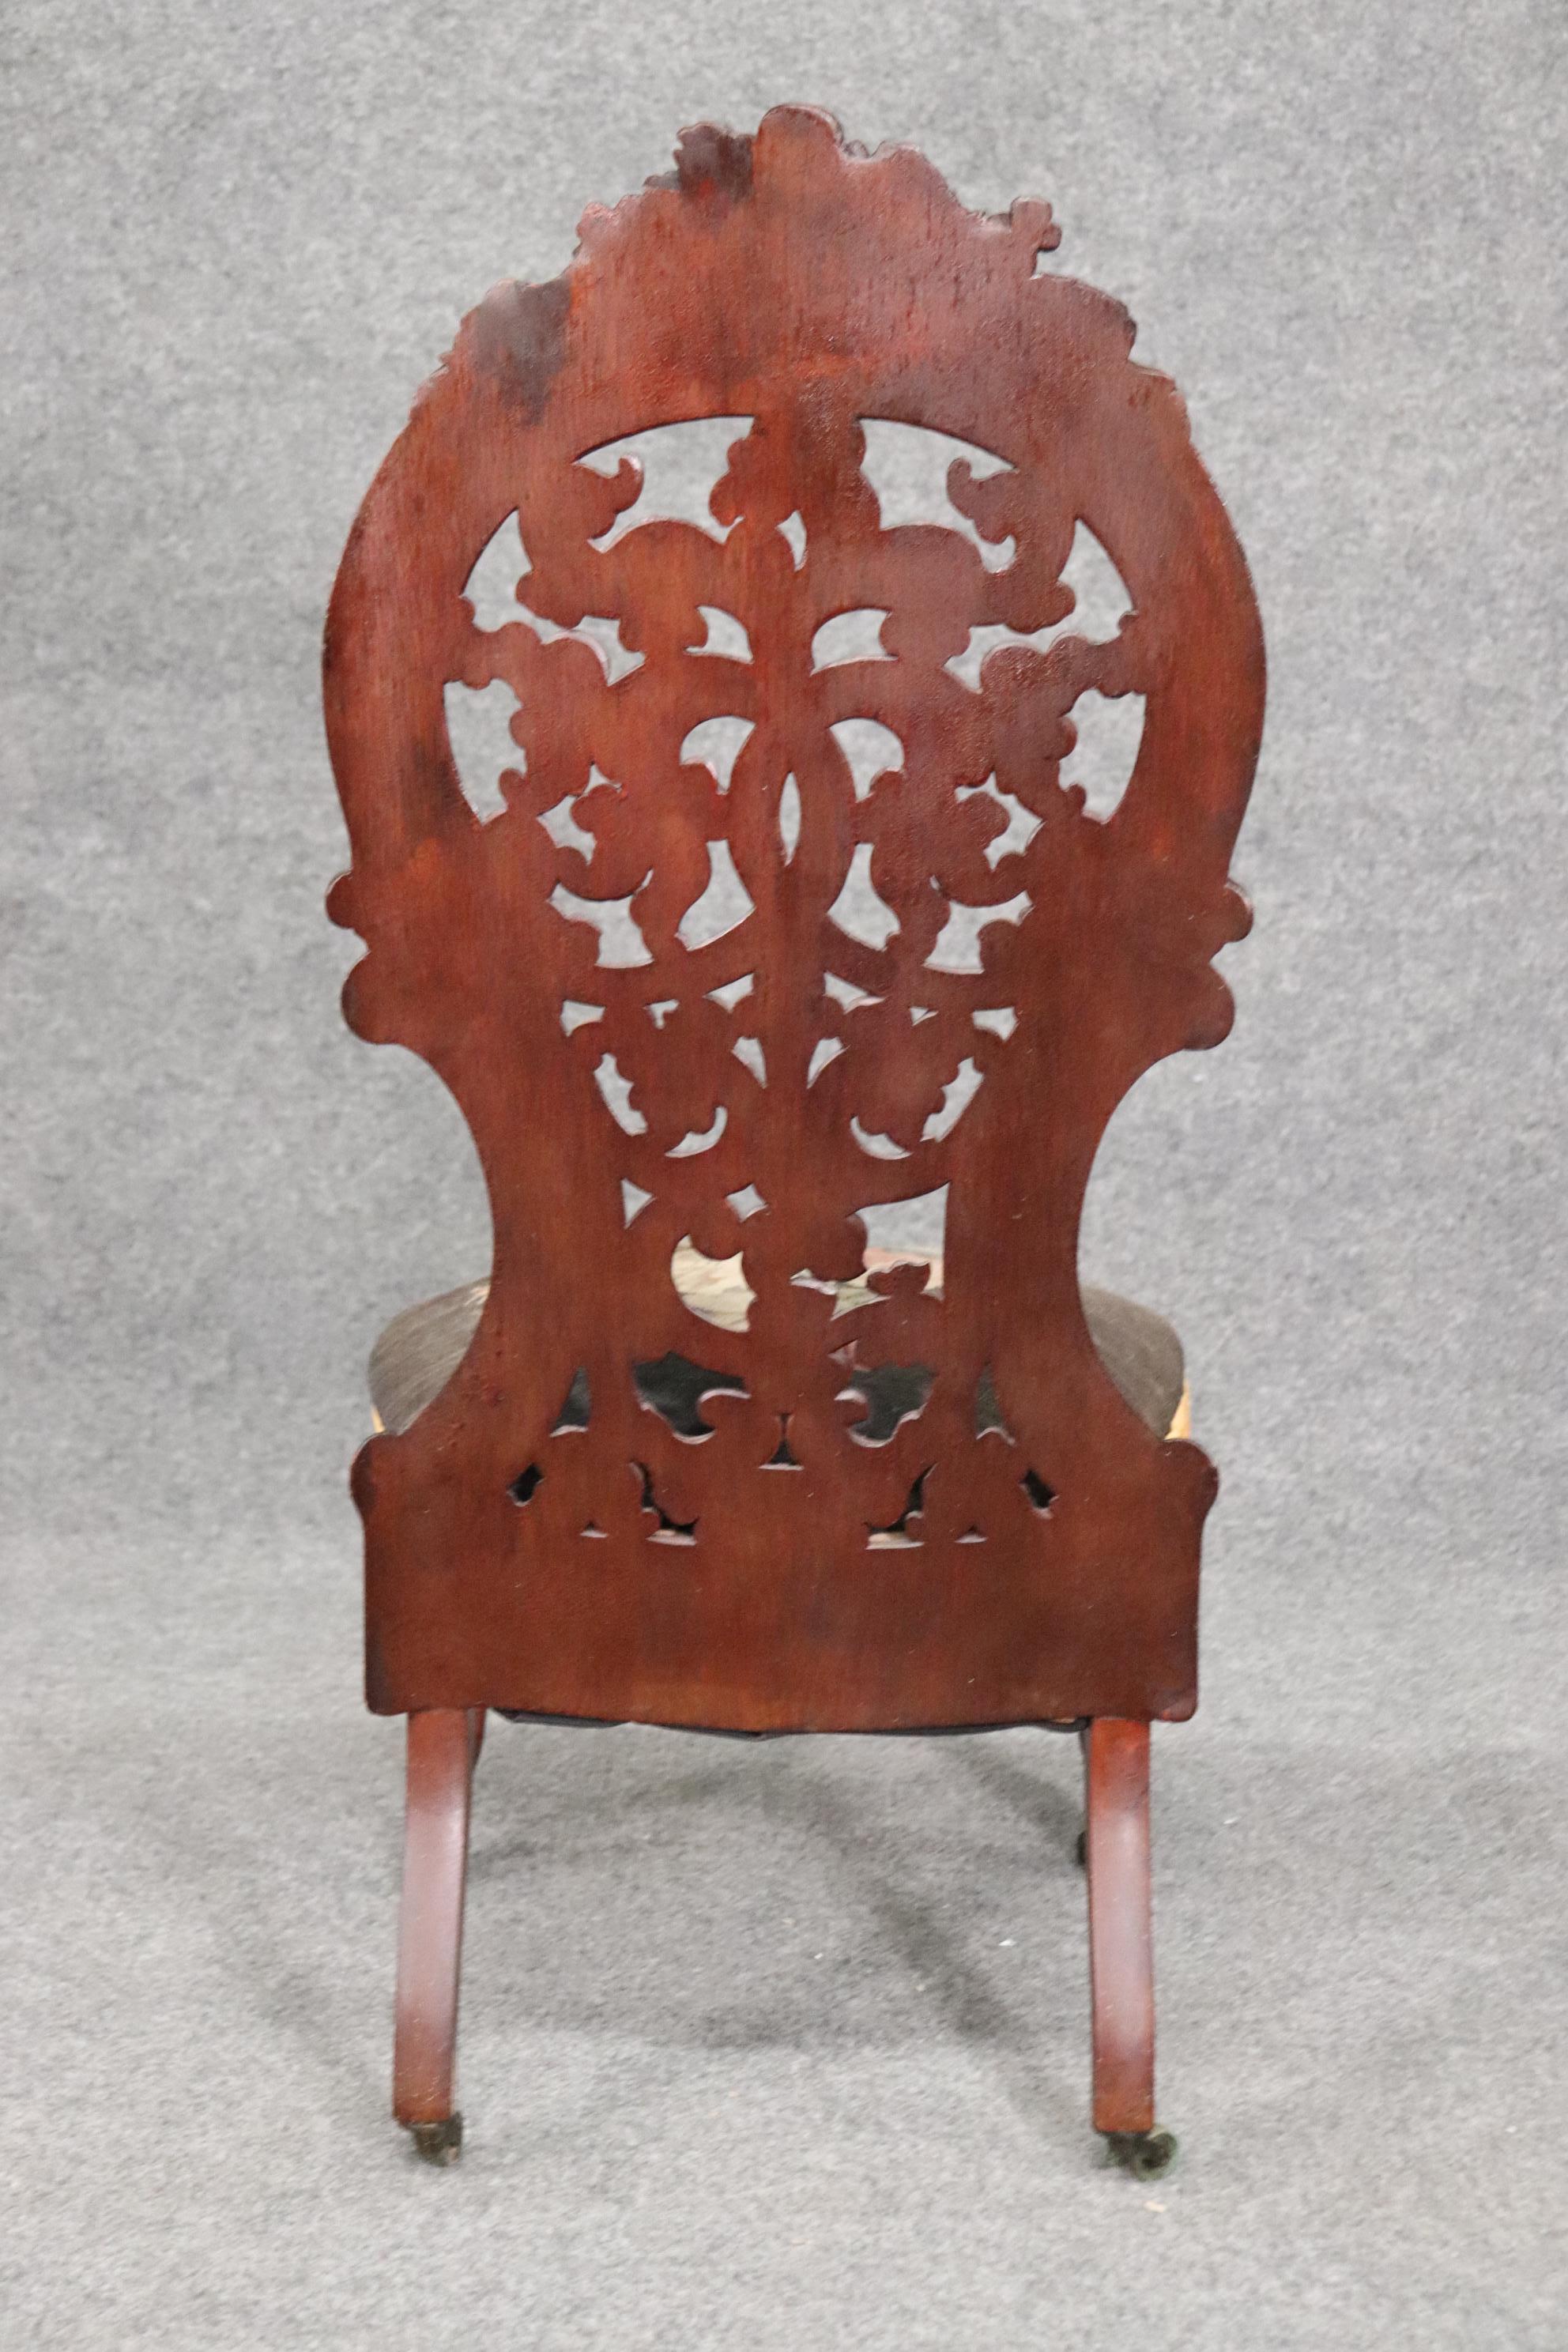 Mid-19th Century Meeks or Belter Laminated Rosewood Side Chair Circa 1860s